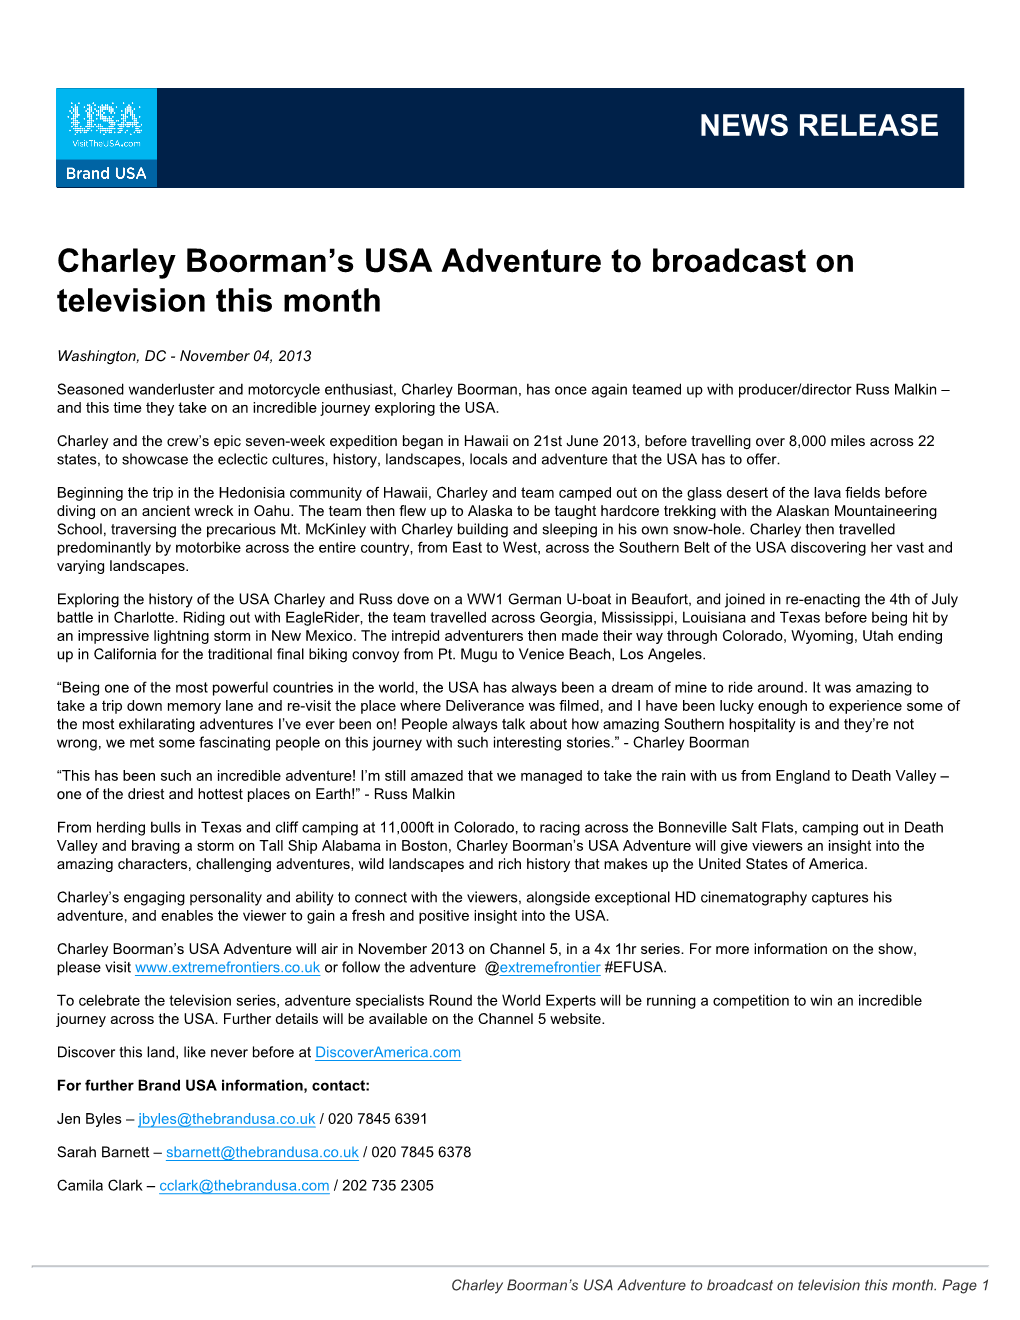 Charley Boorman's USA Adventure to Broadcast on Television This Month